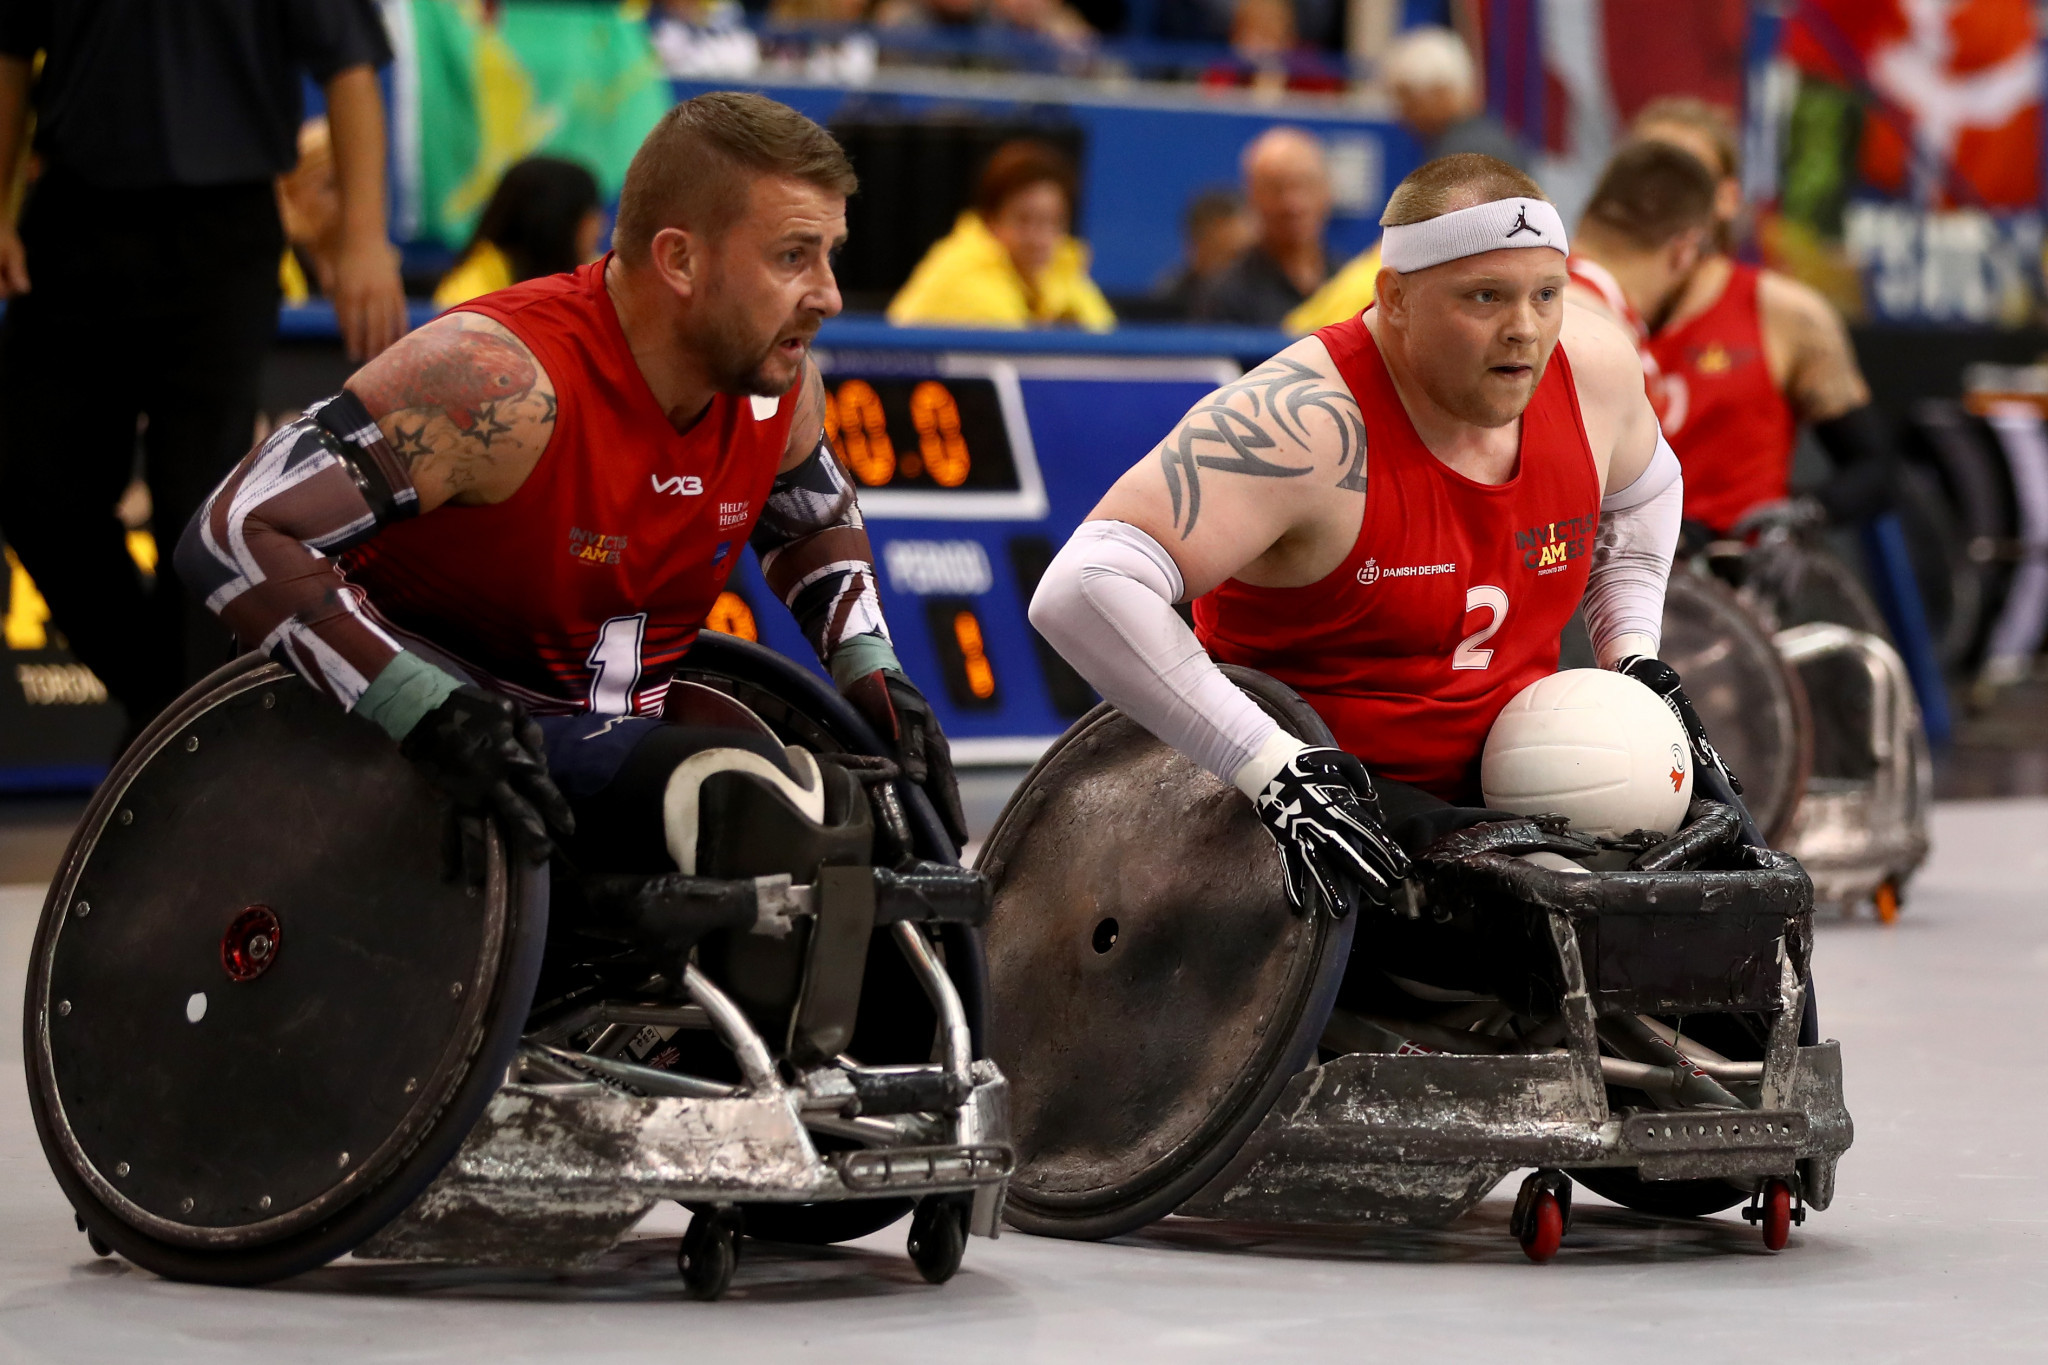 Velje in Denmark has been named as the host city for the 2019 International Wheelchair Rugby Federation (IWRF) European Championship Division A which Great Britain will feature in ©Getty Images 